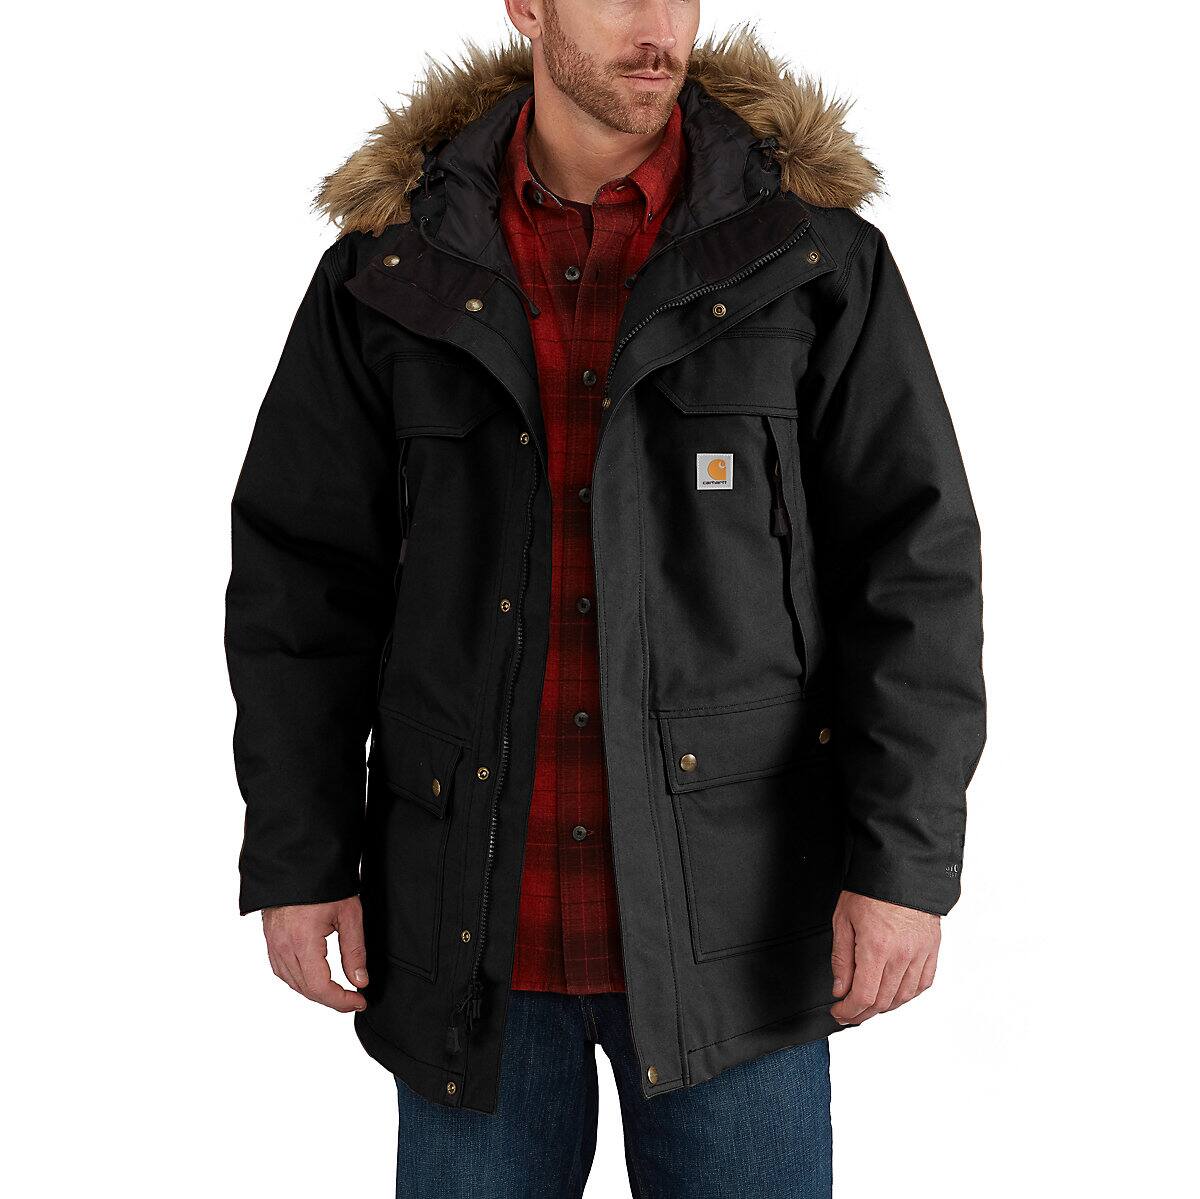 Contest tension tape QUICK DUCK® SAWTOOTH PARKA | Carhartt®